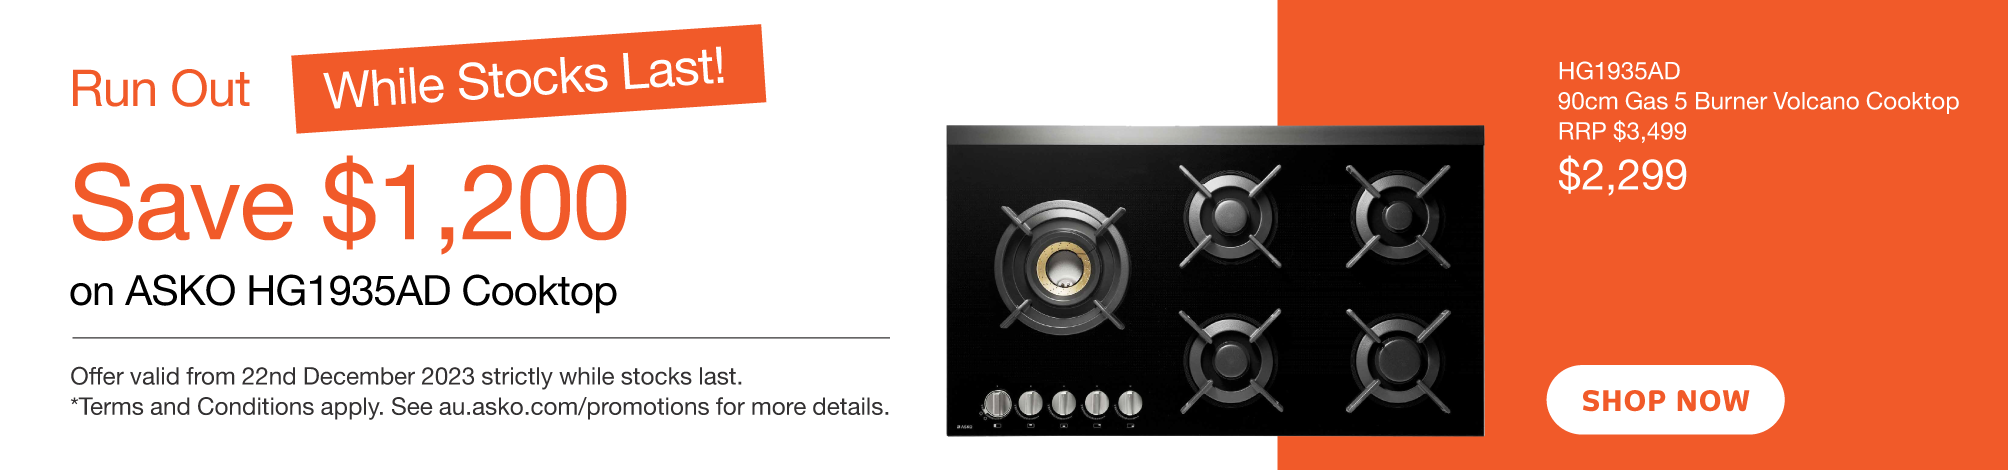 Save $1,200 On ASKO HG1935AD Cooktop